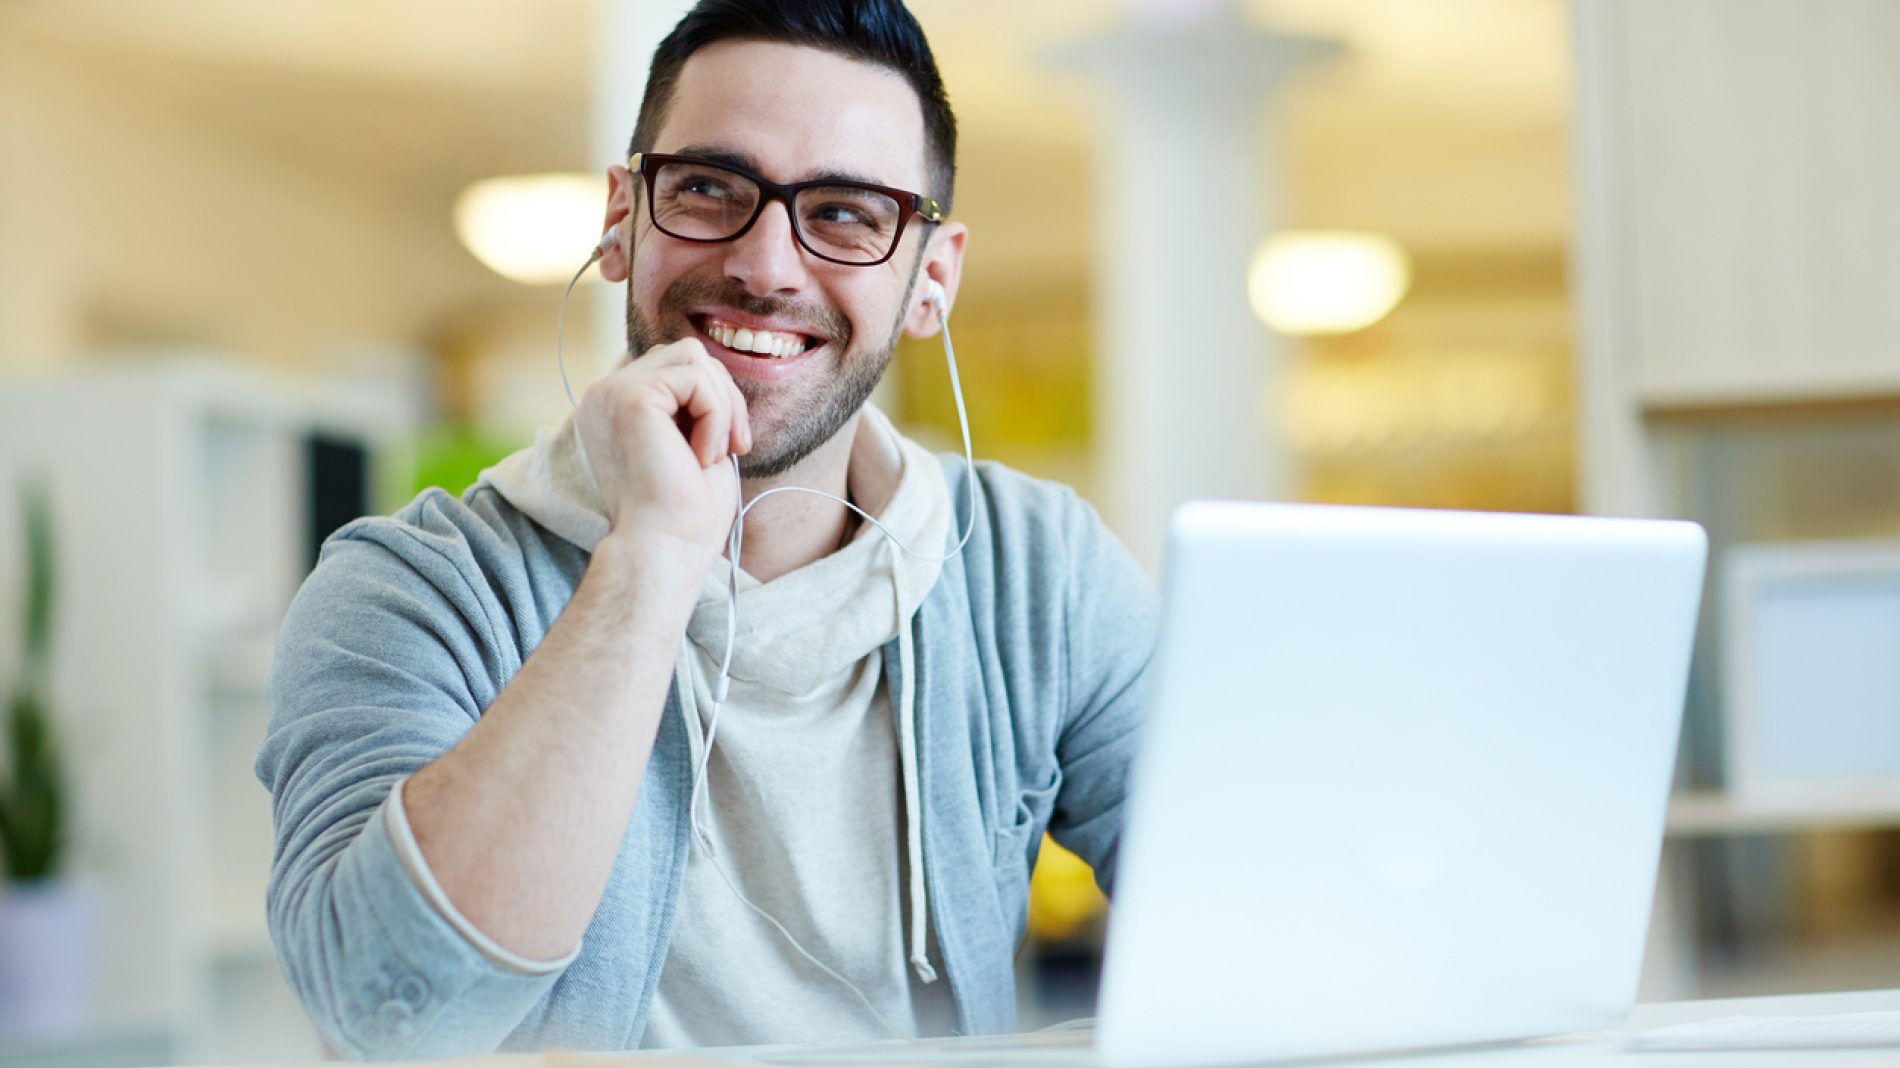 Smiling Adult Man Listening to Music